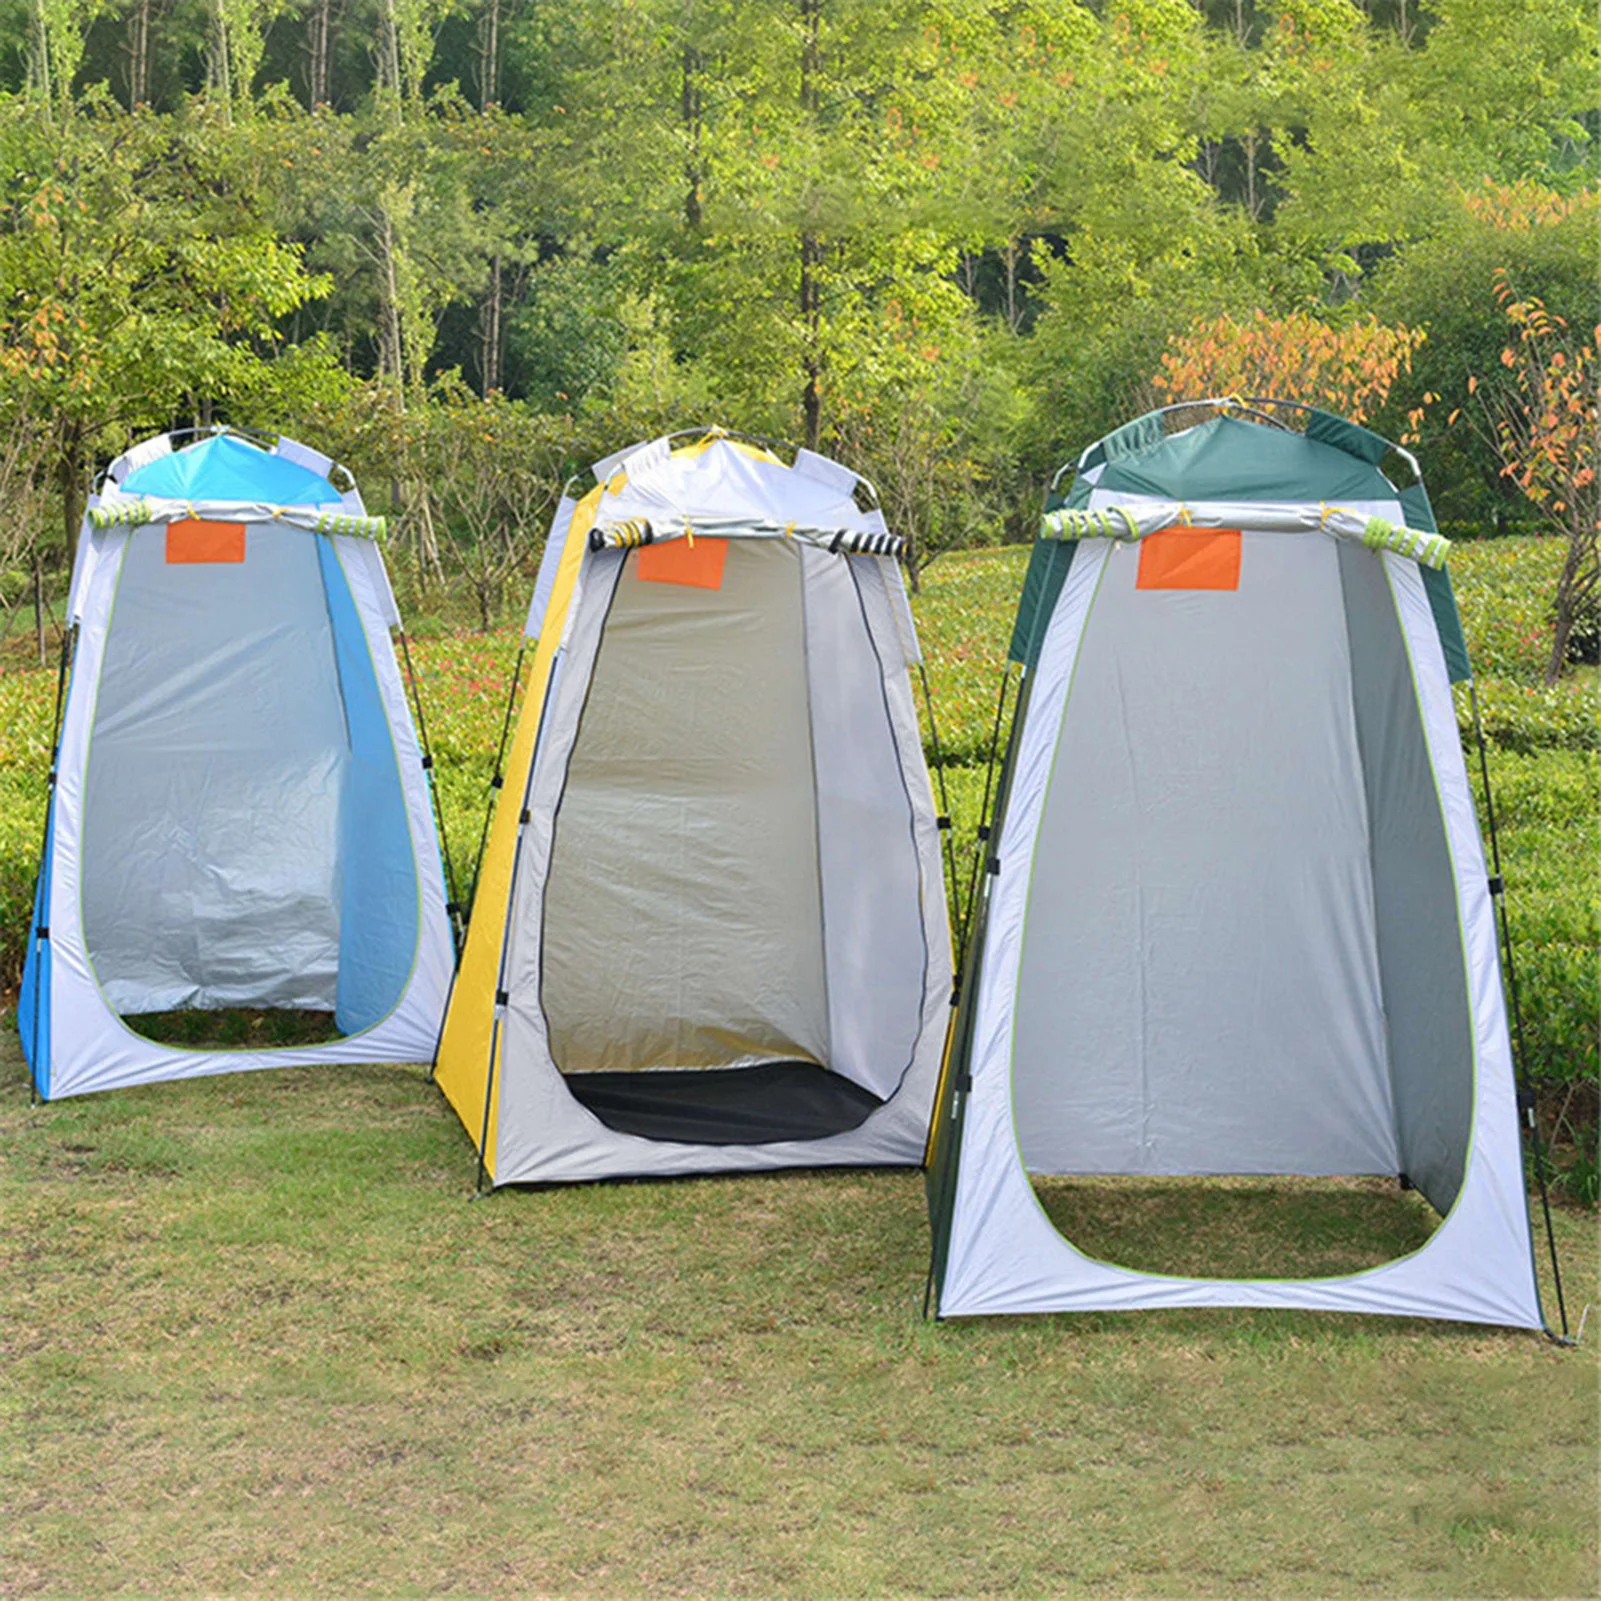 Portable Privacy Shower Toilet Tent Camping Automatic Pop Up Tent UV Function For Outdoor Camping Hiking Dressing Photography